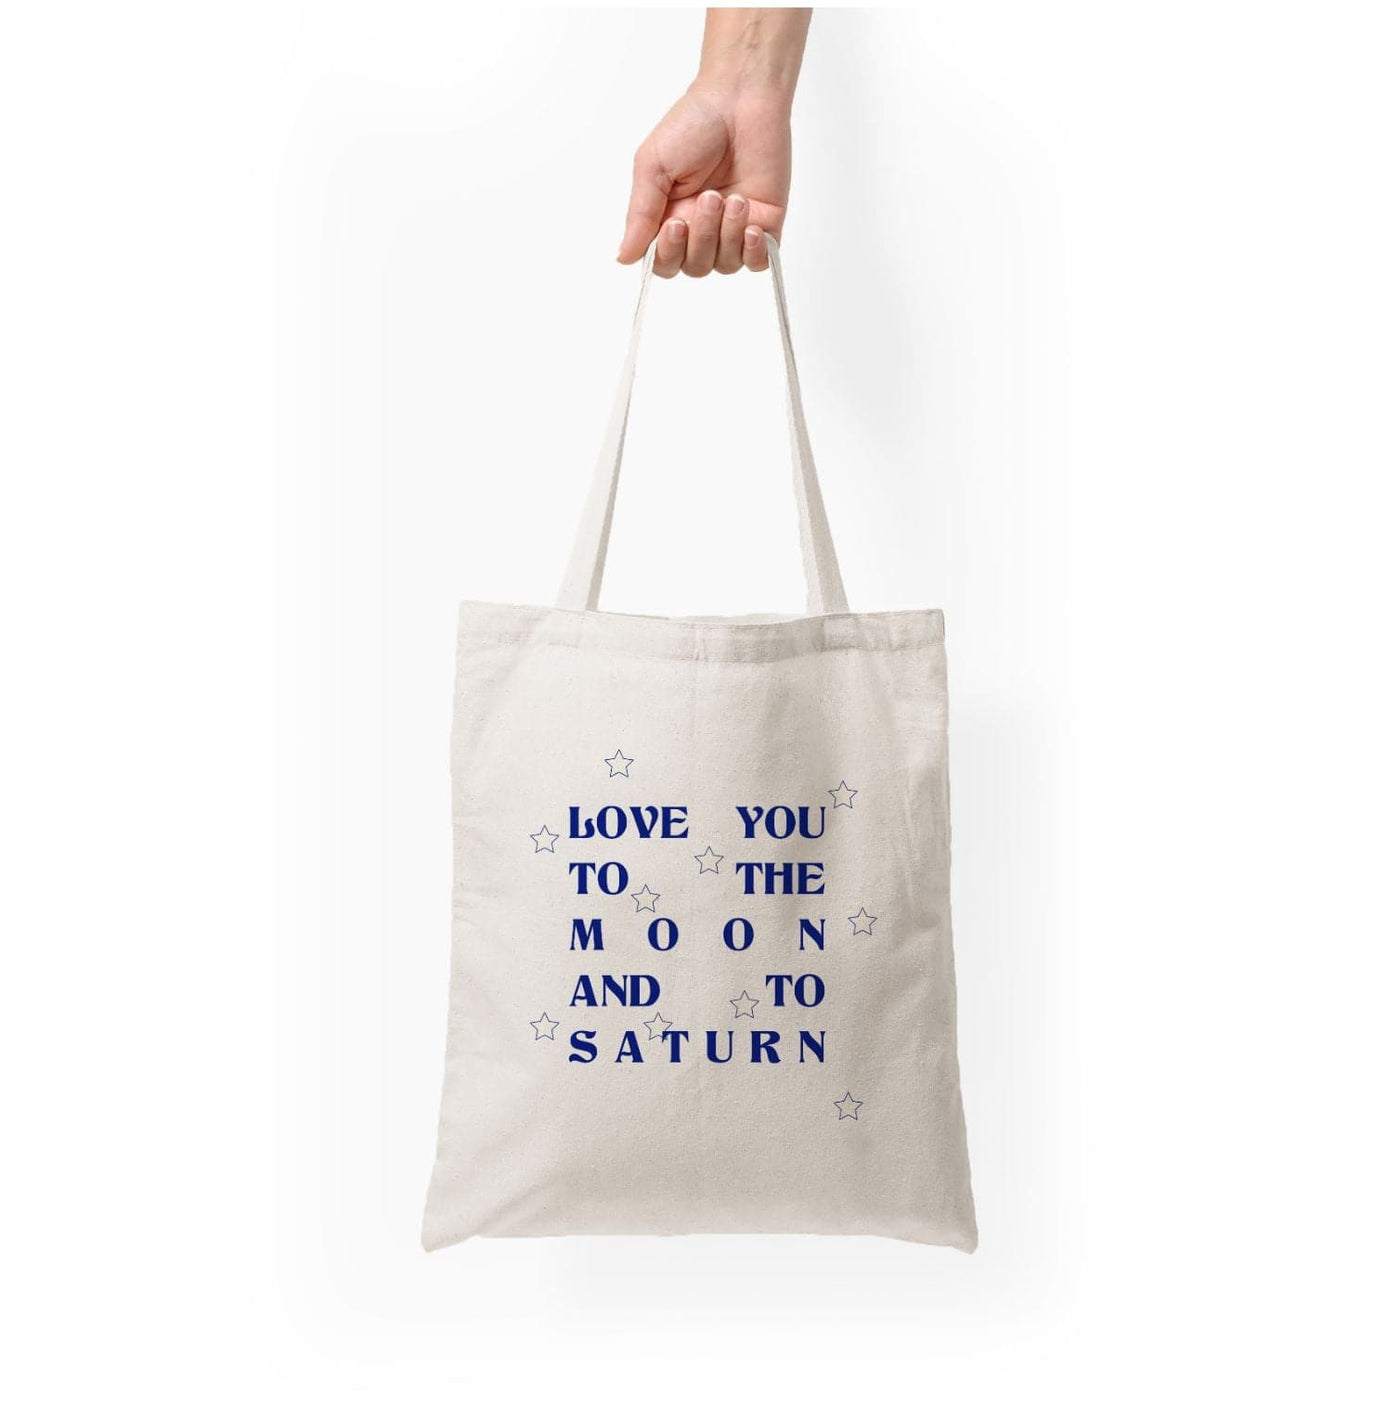 Love You To The Moon And To Saturn - Taylor Tote Bag